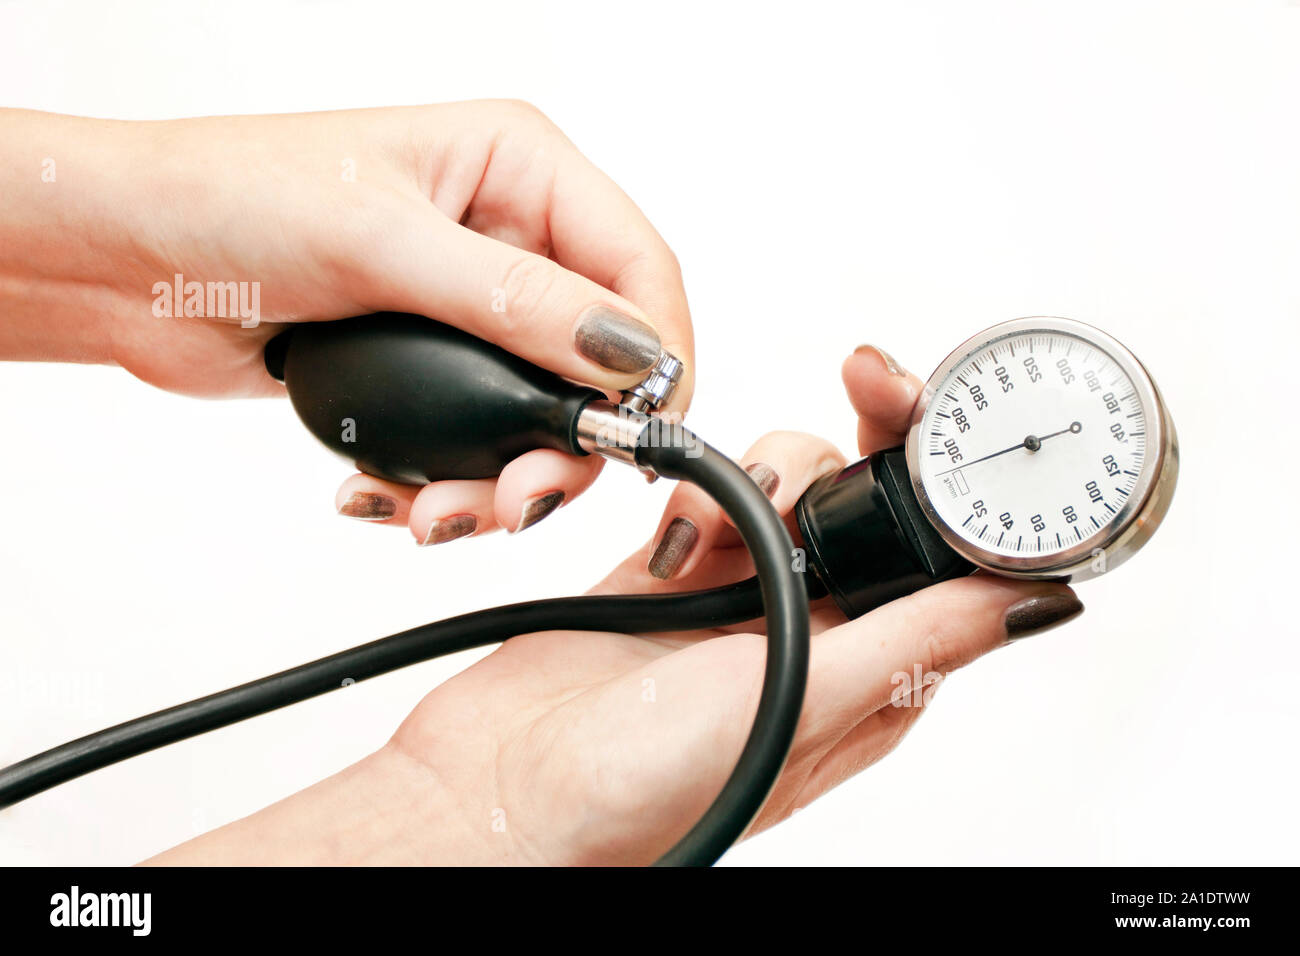 The instrument for pressure measurement in hands of the doctor Stock Photo